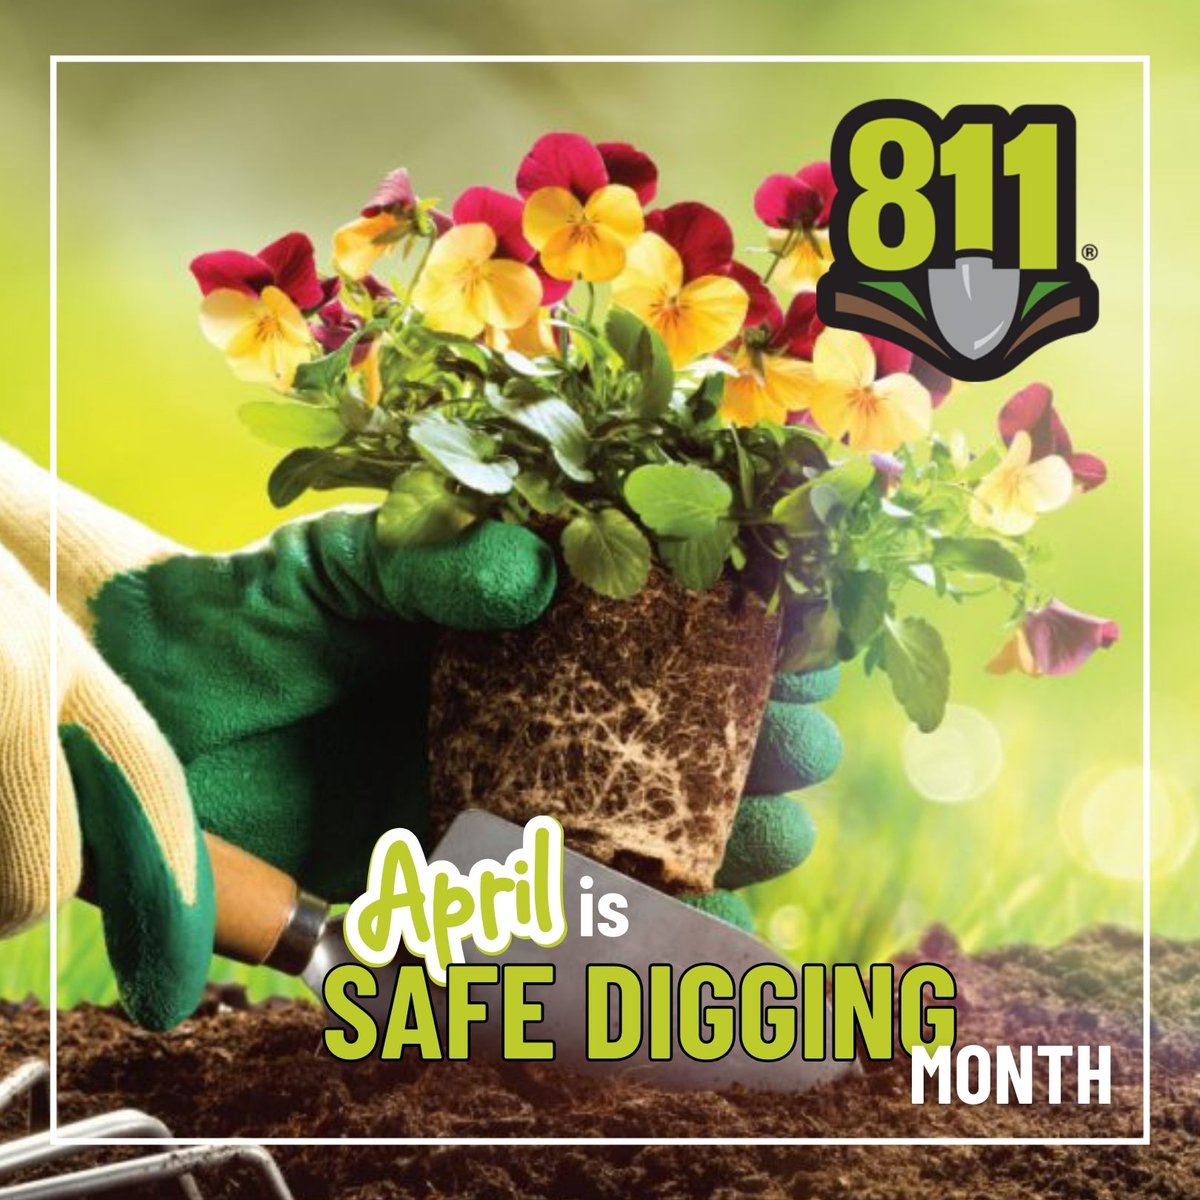 Our partner @JULIE1call reminds you that April is National Safe Digging Month. Planning any DIY projects this spring, remember to #Call811 before you dig or go to bit.ly/E-request. #JULIEBeforeYouDig #Call811 #Celebrating50years